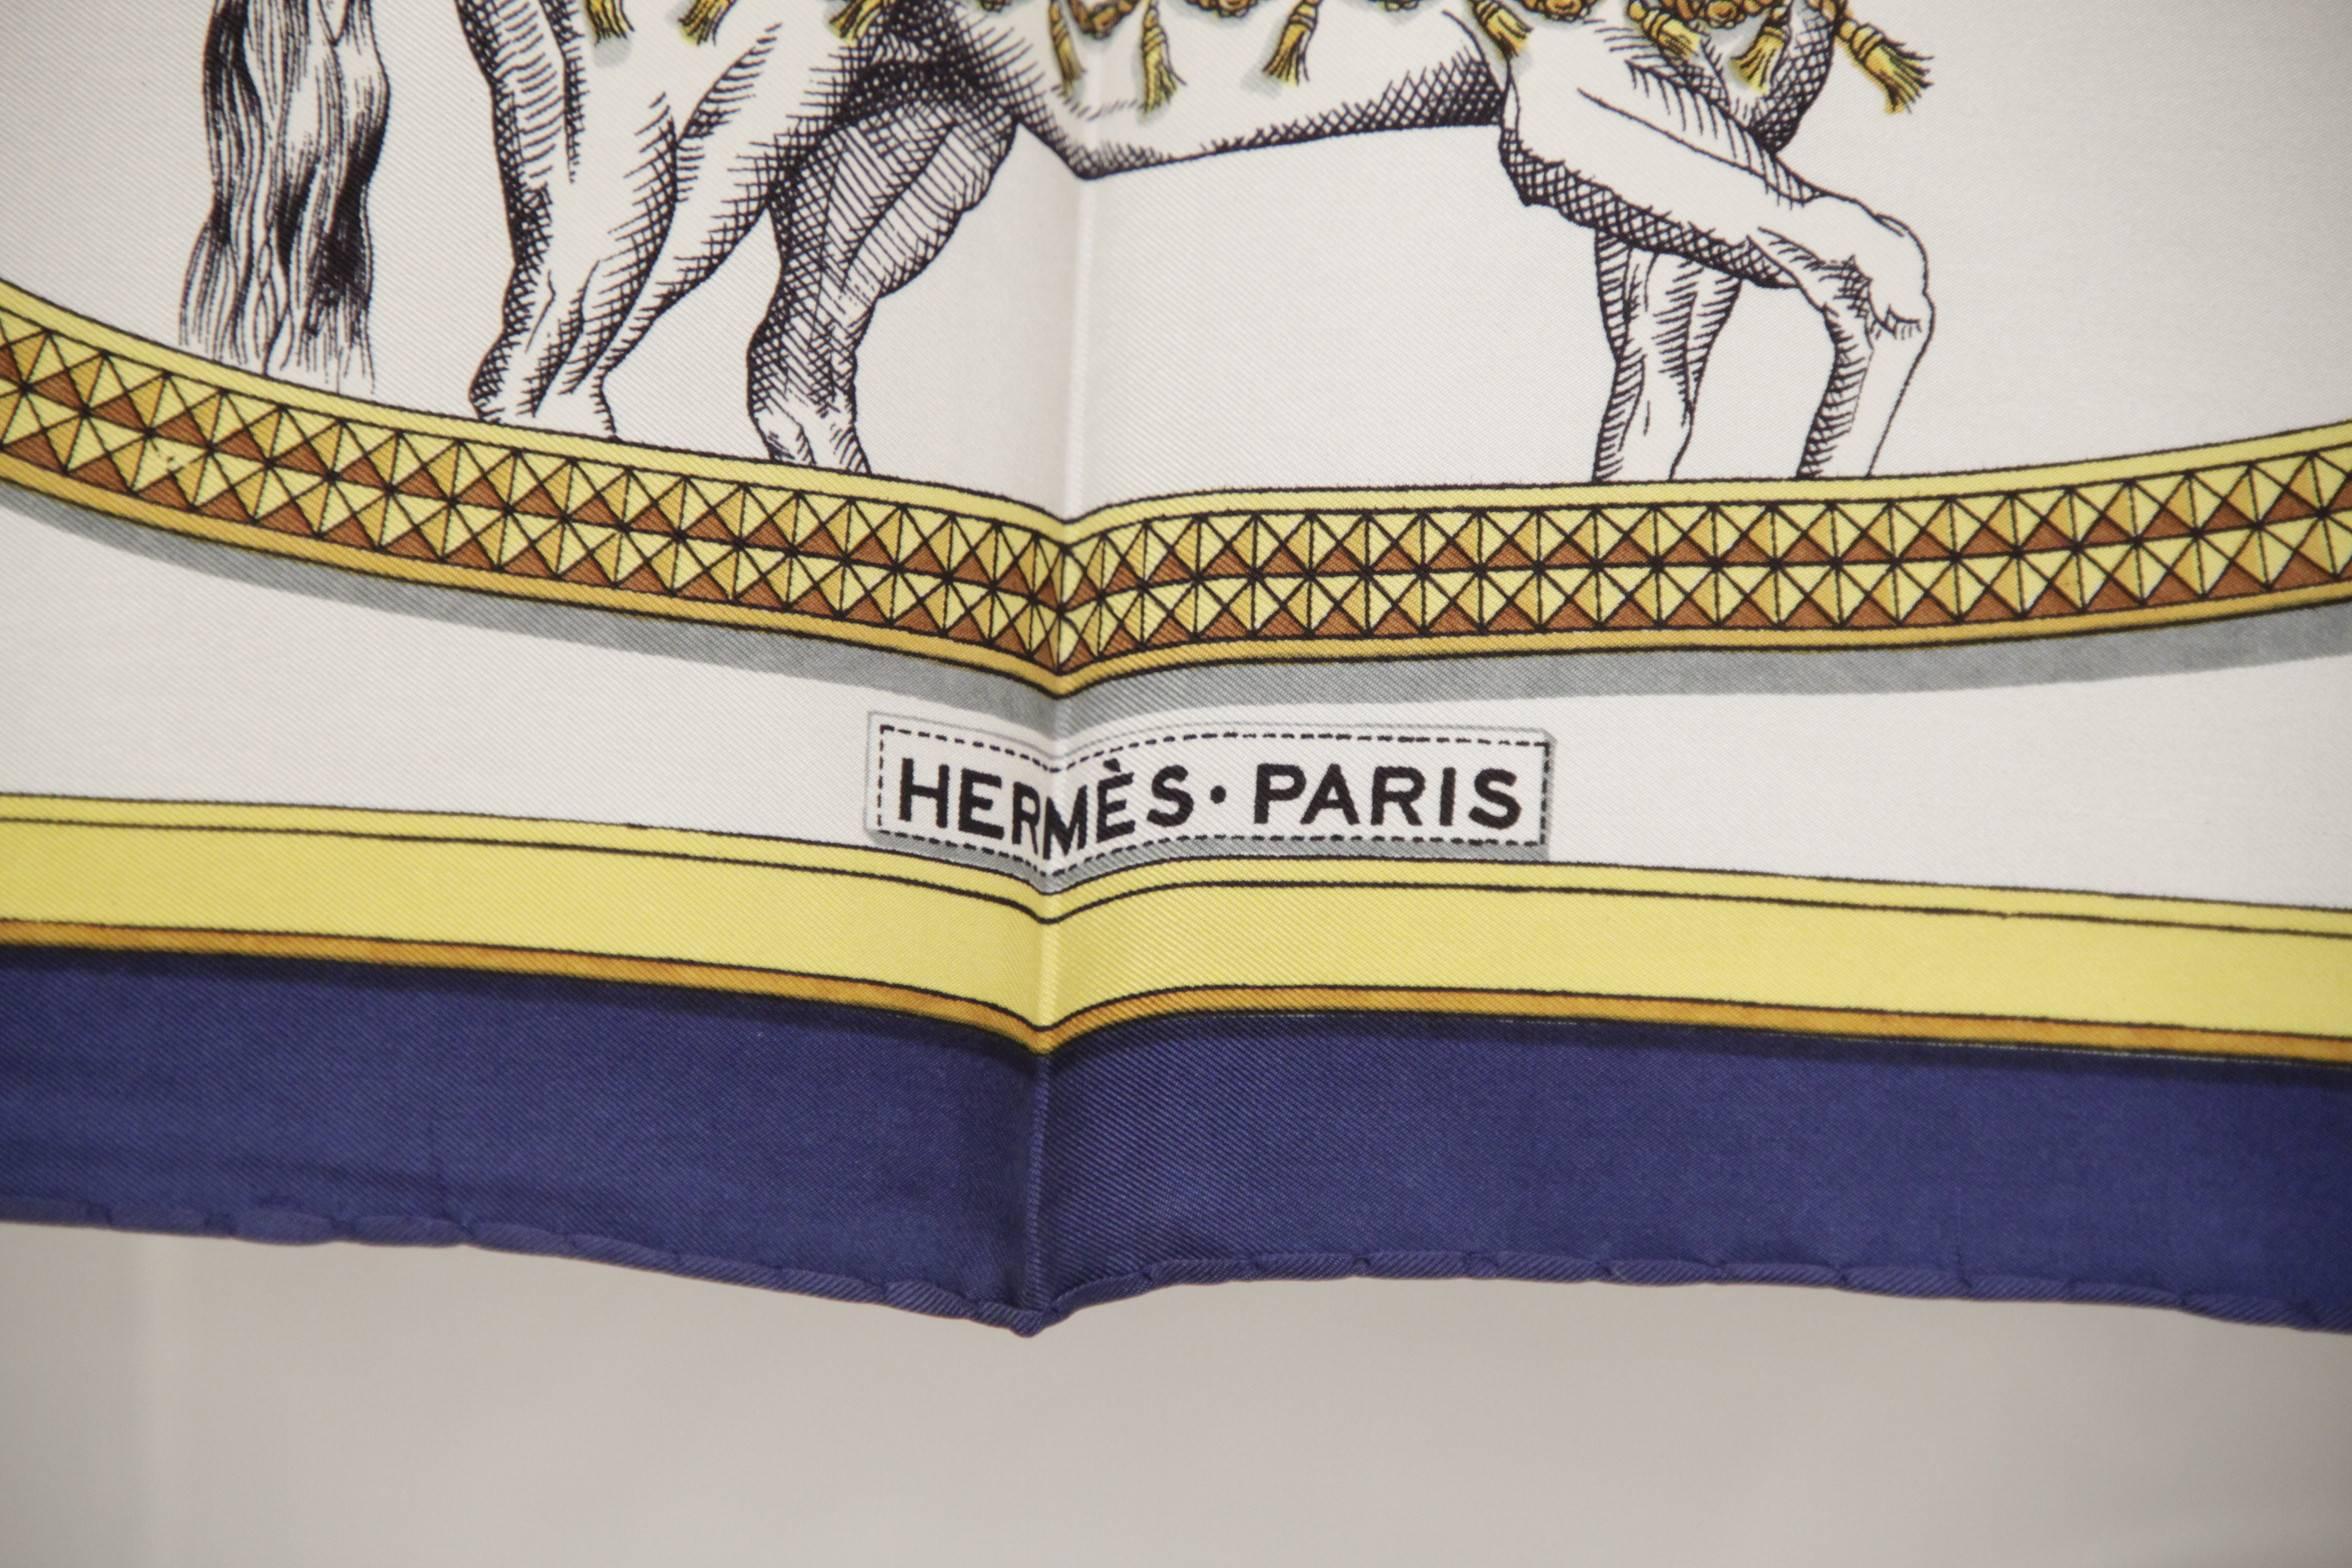  Brand: HERMES PARIS - Made in France

Condition (please read our condition chart below): C :FAIR CONDITION - Well used, with noticeable defects. Read CONDITION DETAILS in listing description

Condition details: Some small stains due to normal